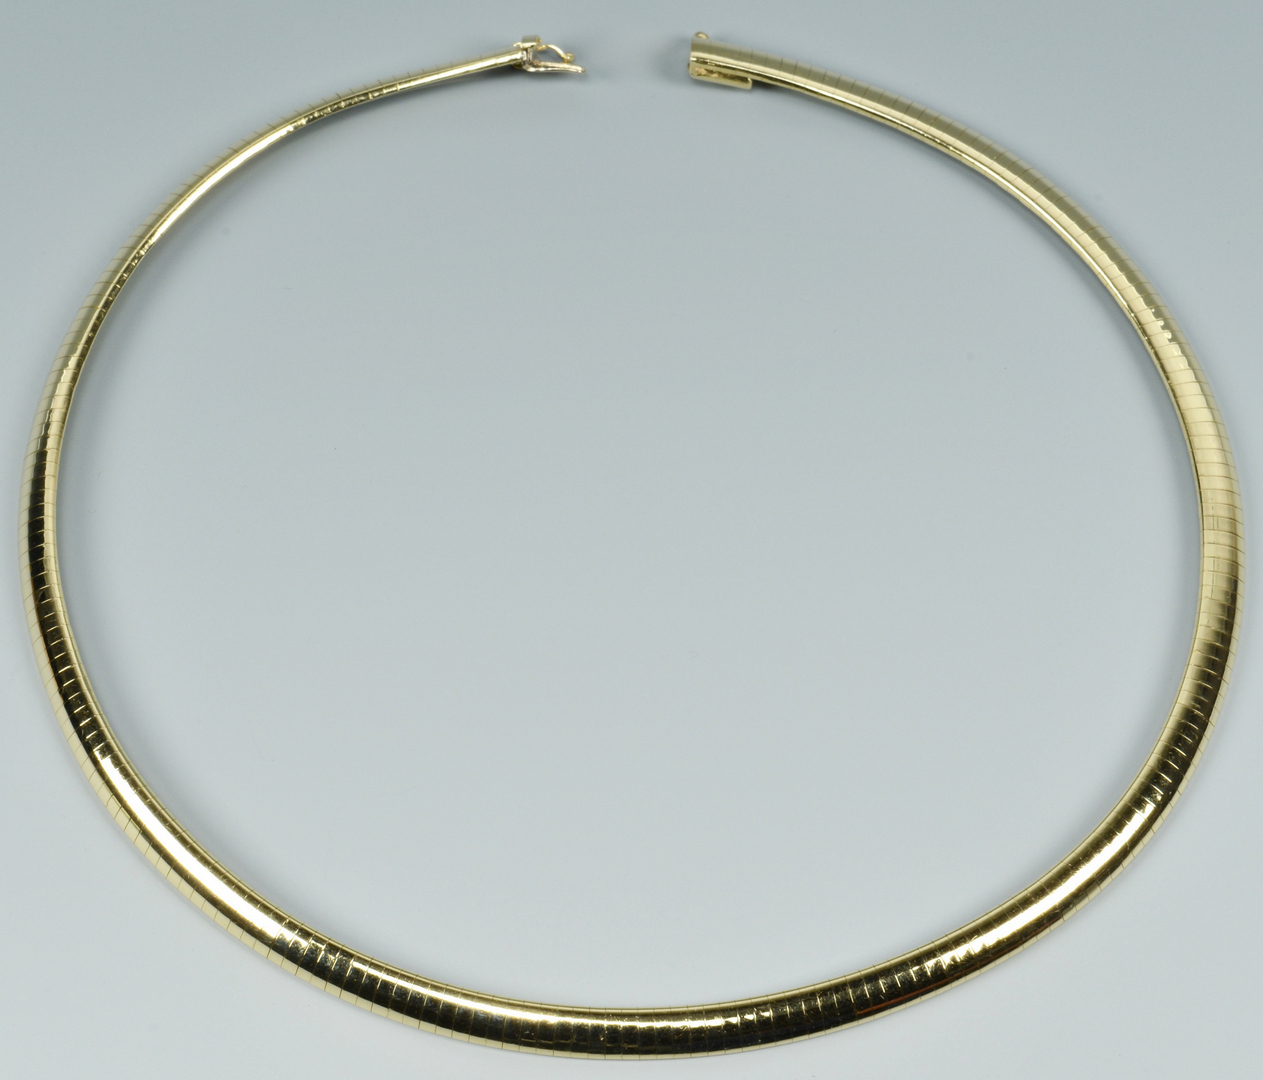 Lot 3088064: 14k Yellow Gold Omega Collar Necklace